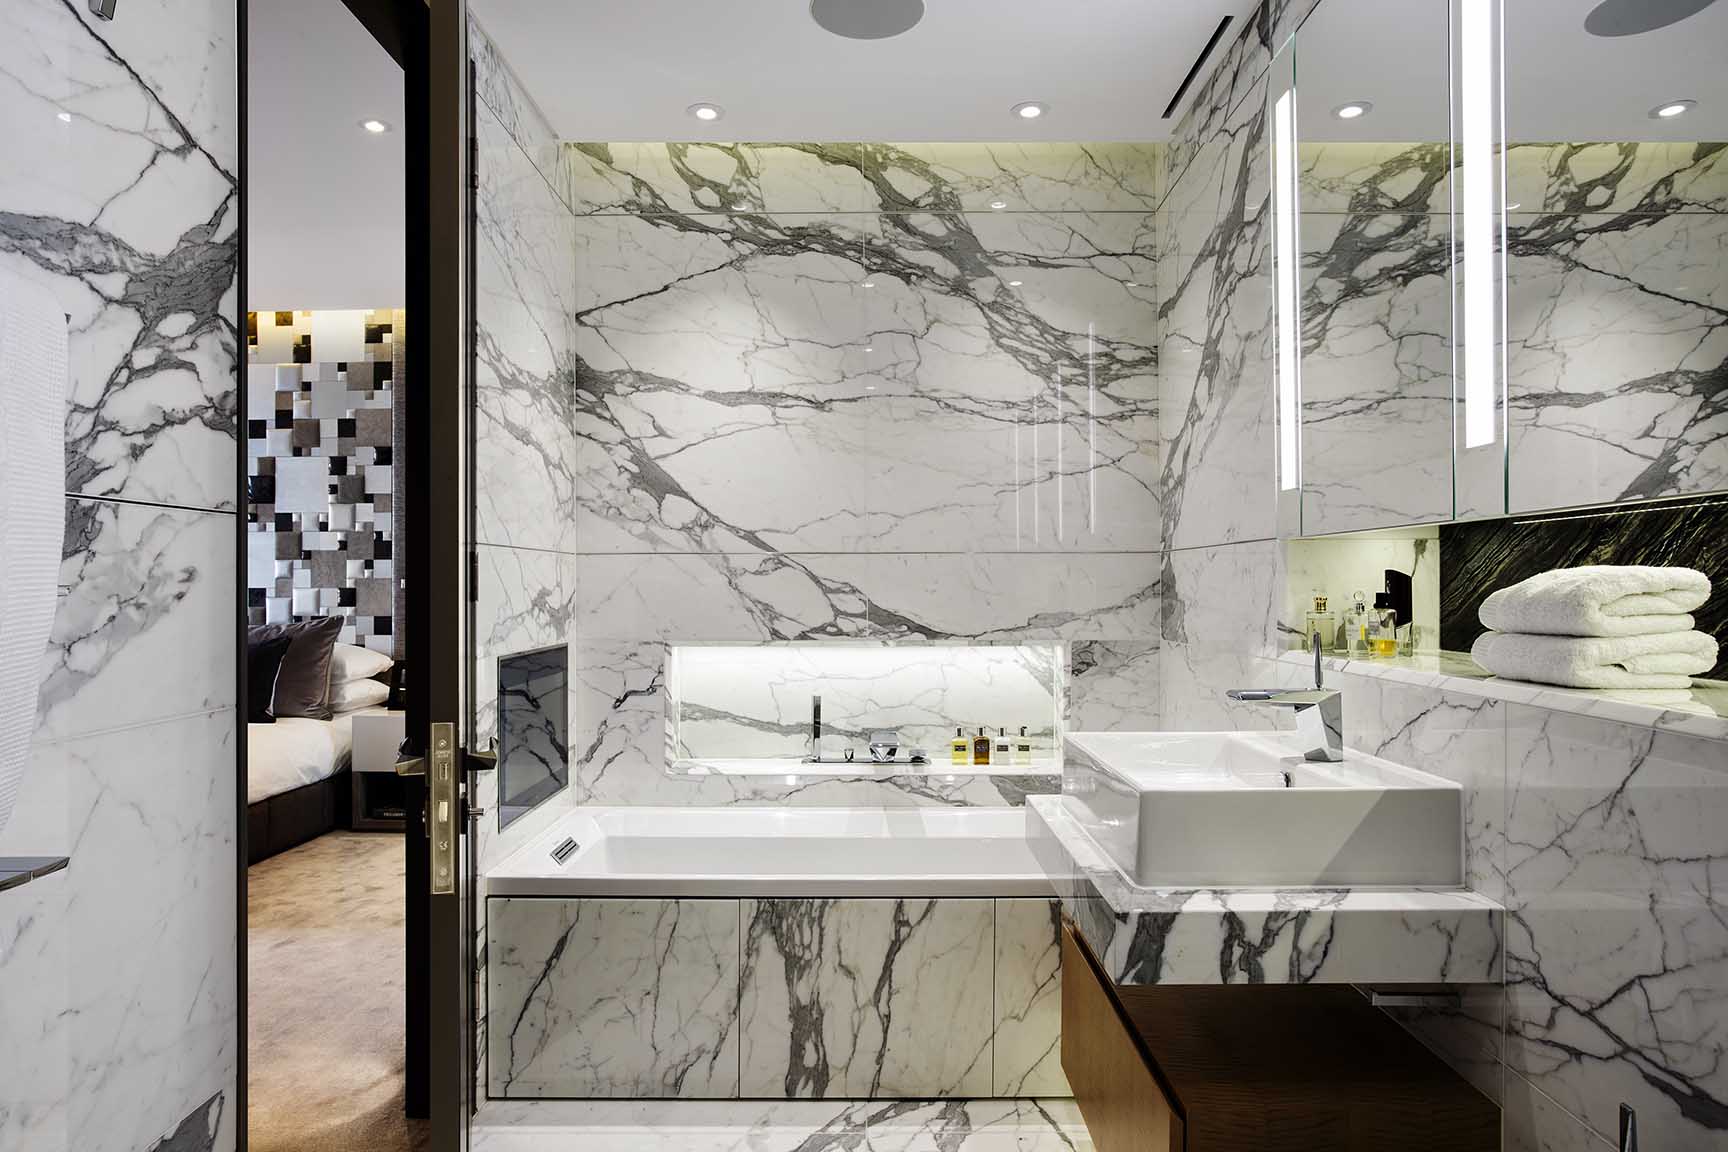 Bathroom clad in full height arabescatto marble slabs, integrated TV and ceiling speakers